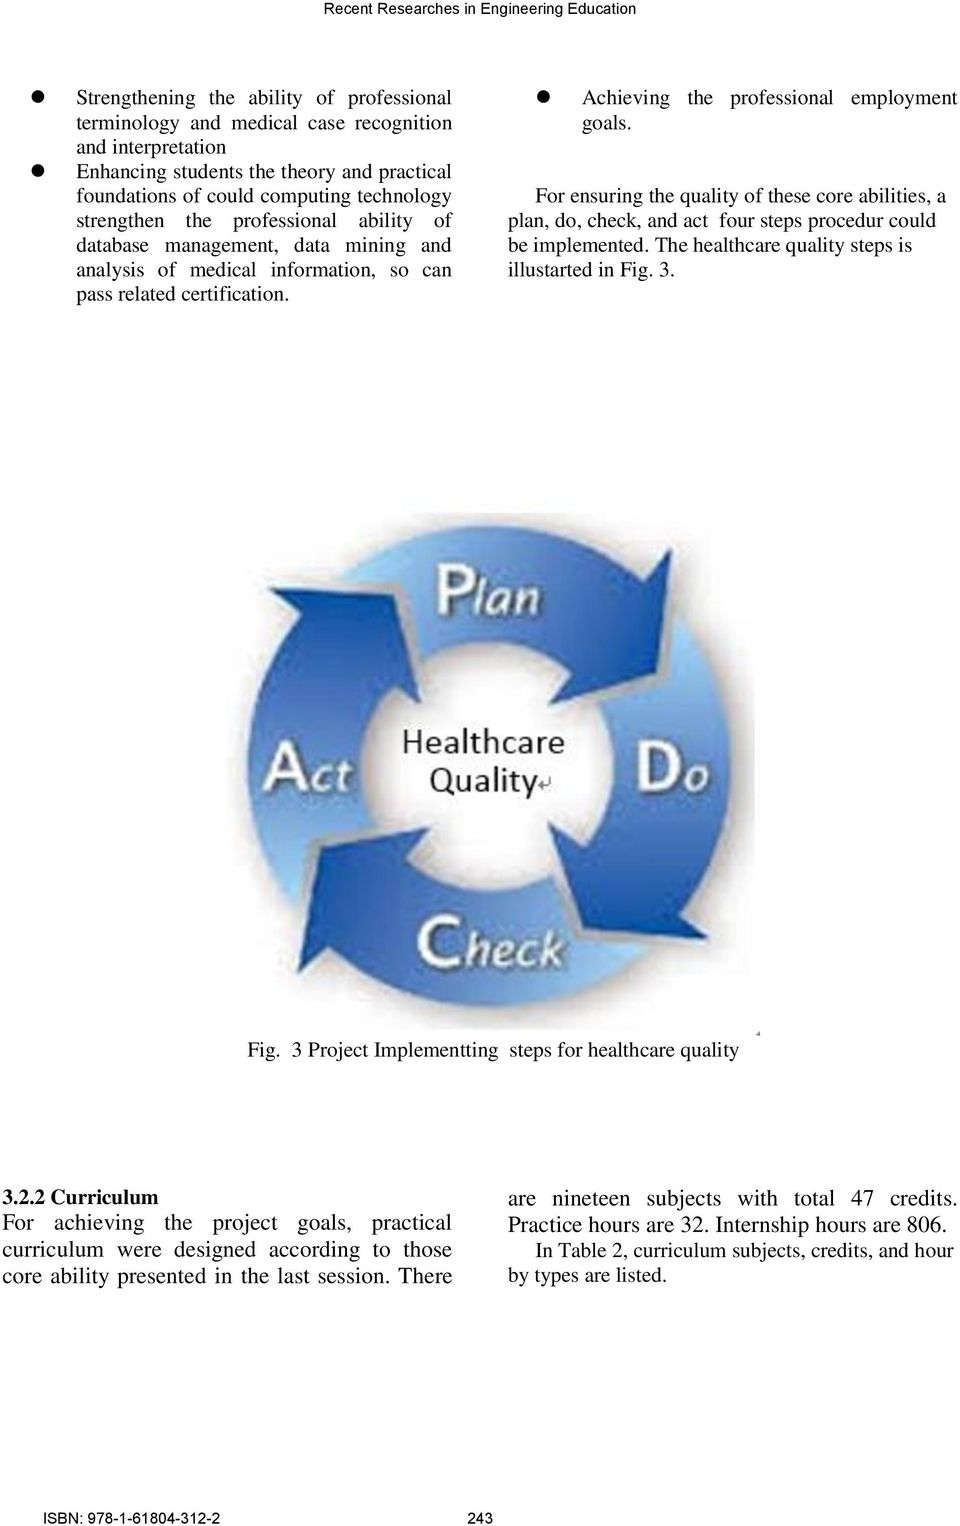 For ensuring the quality of these core abilities, a plan, do, check, and act four steps procedur could be implemented. The healthcare quality steps is illustarted in Fig.